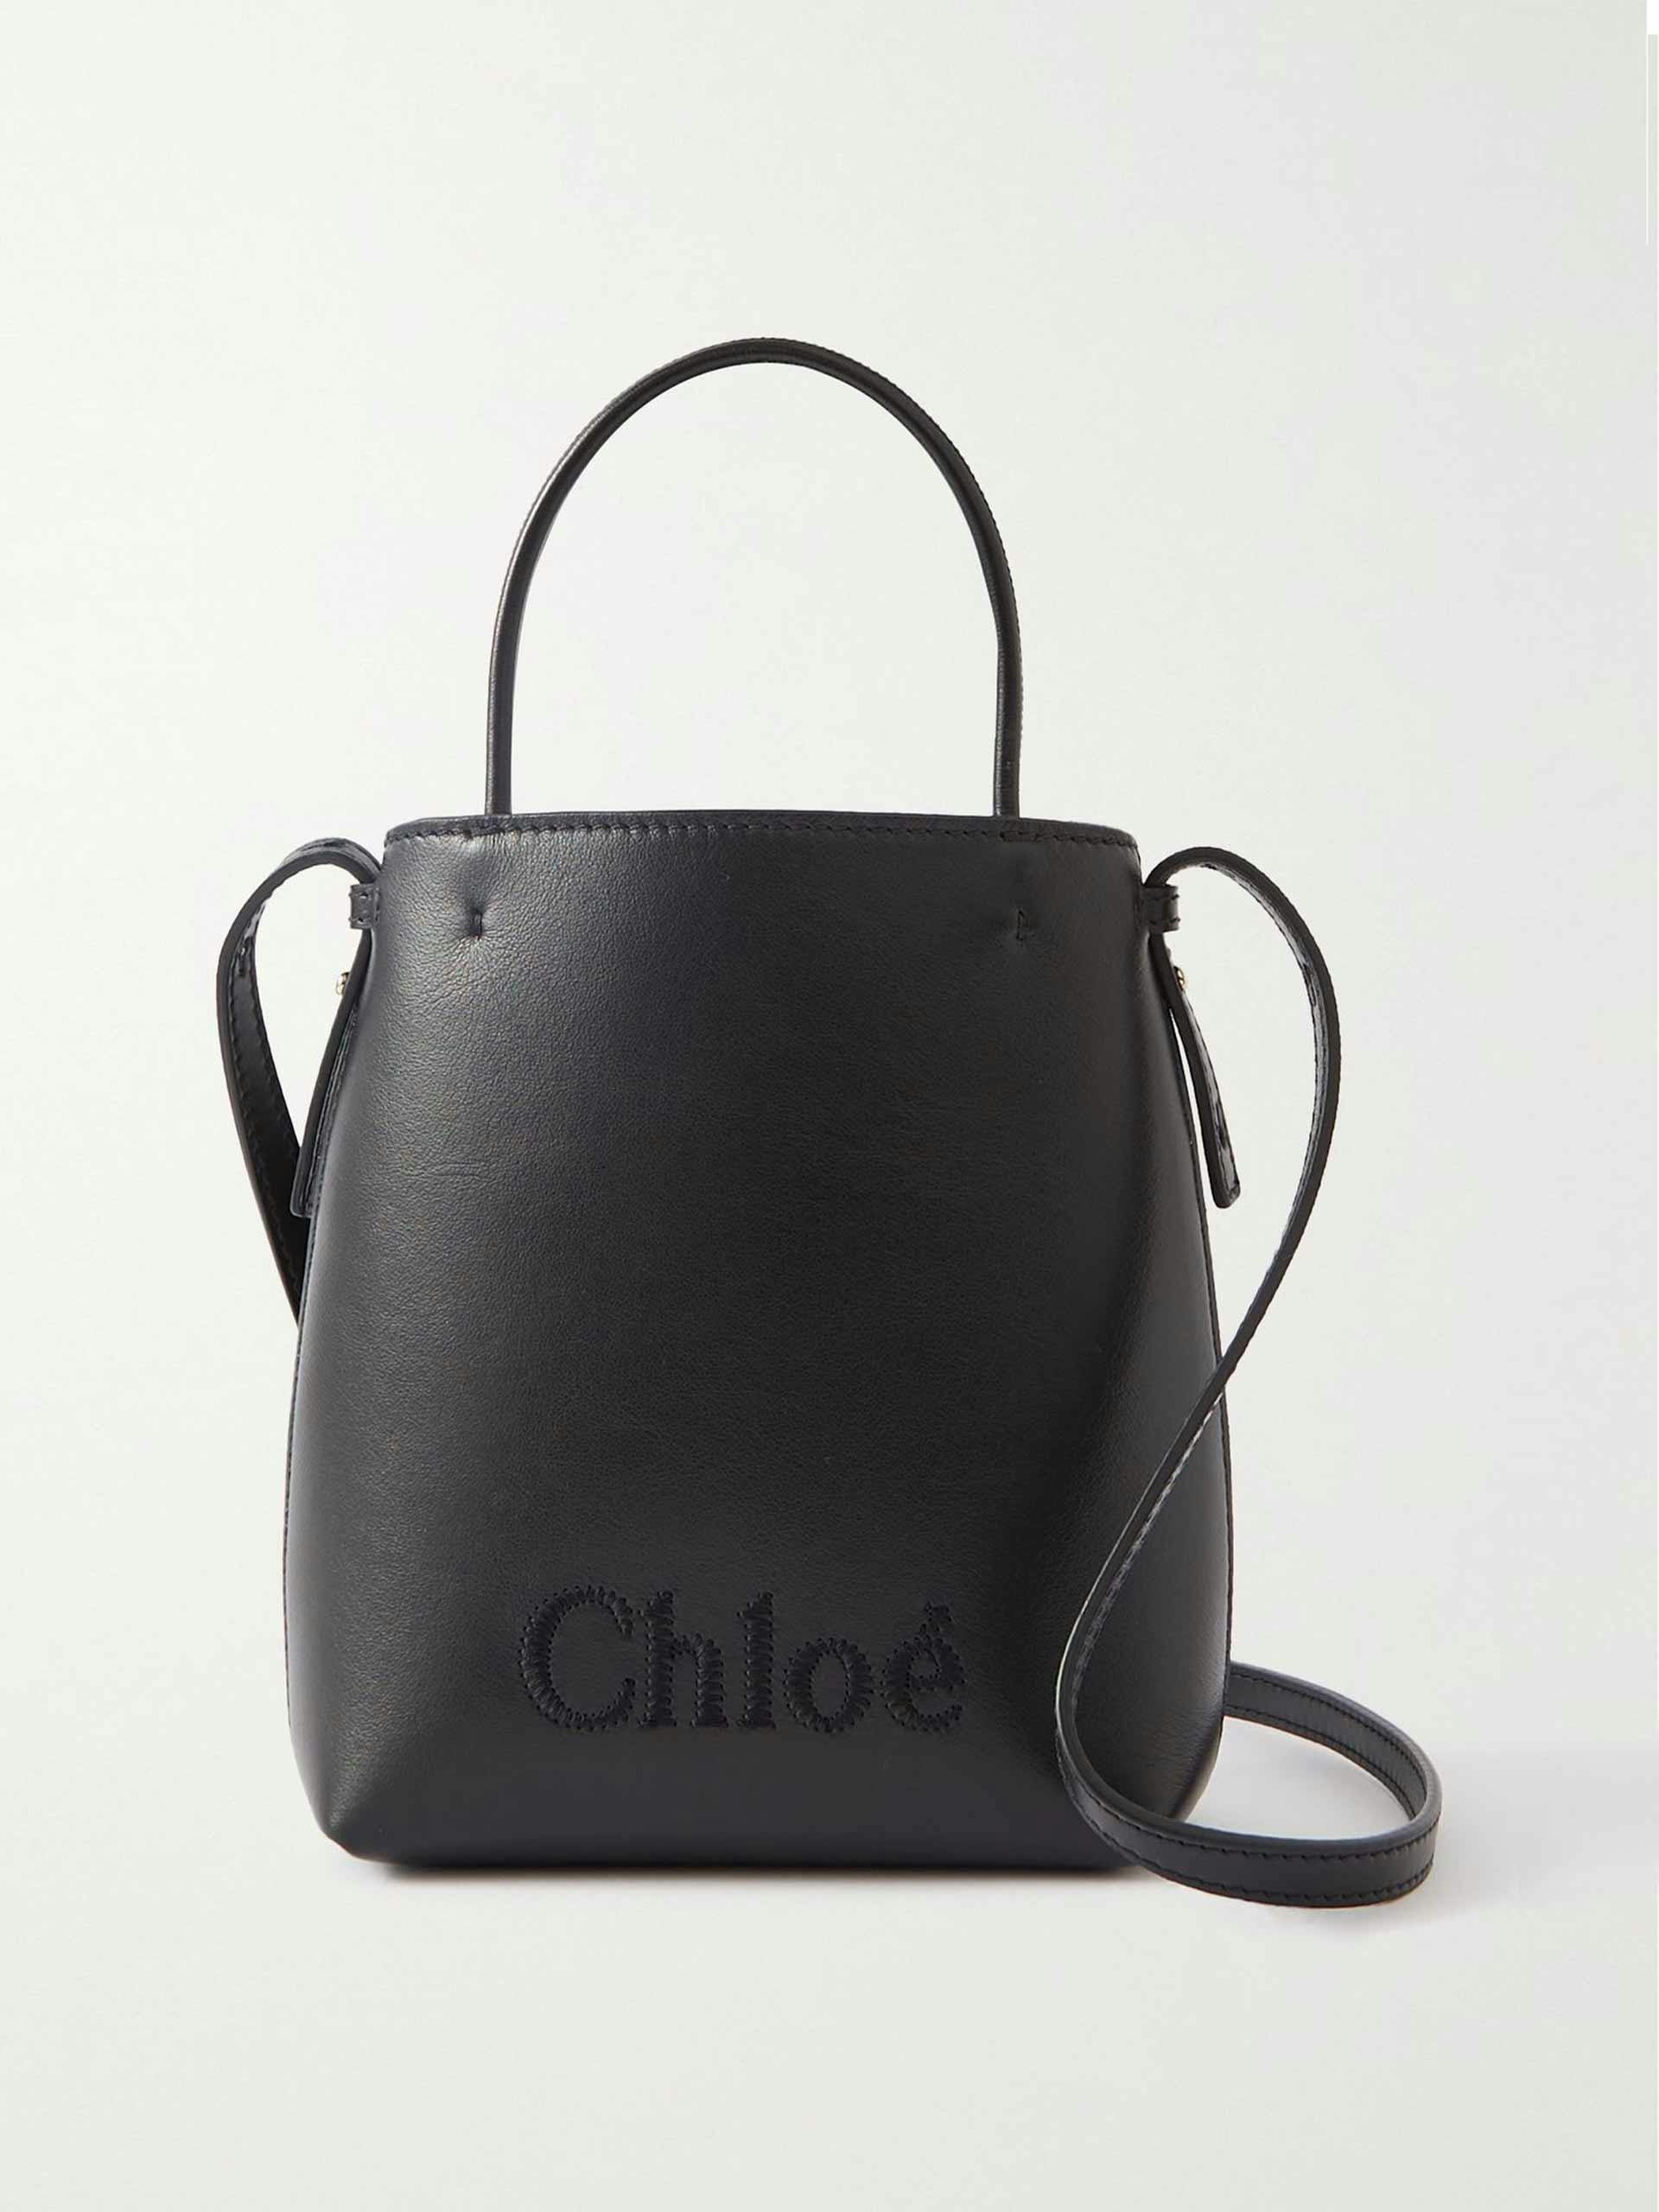 Embroidered black leather tote